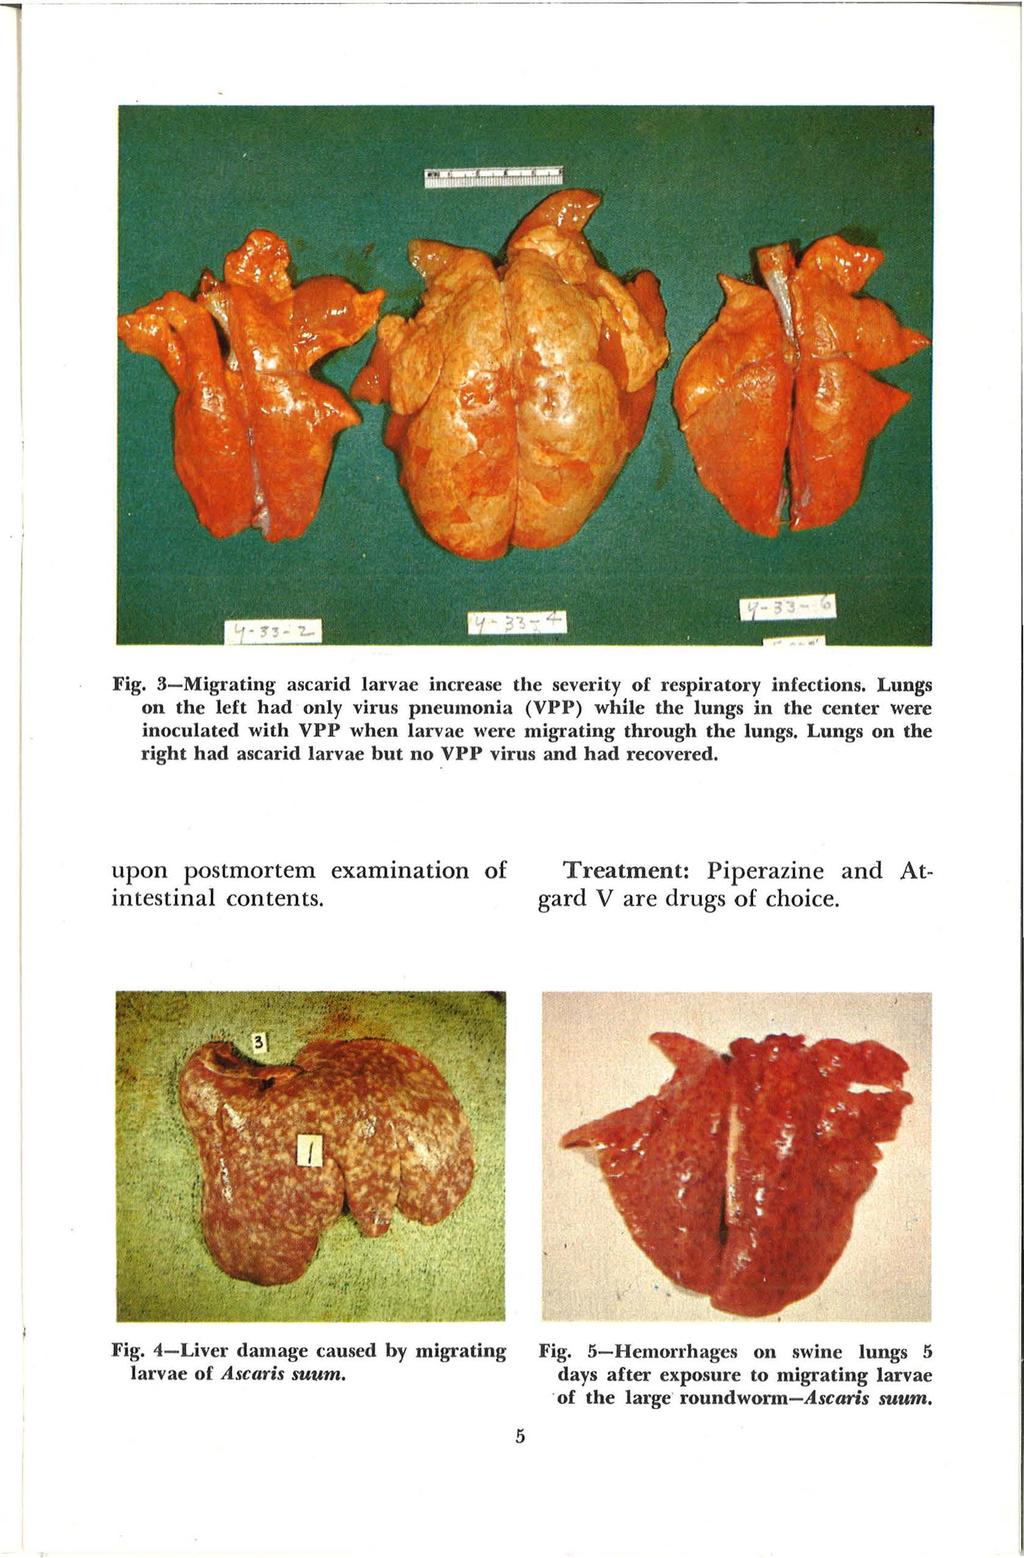 Fig. 3-Migrating ascarid larvae increase the severity of respiratory infections.